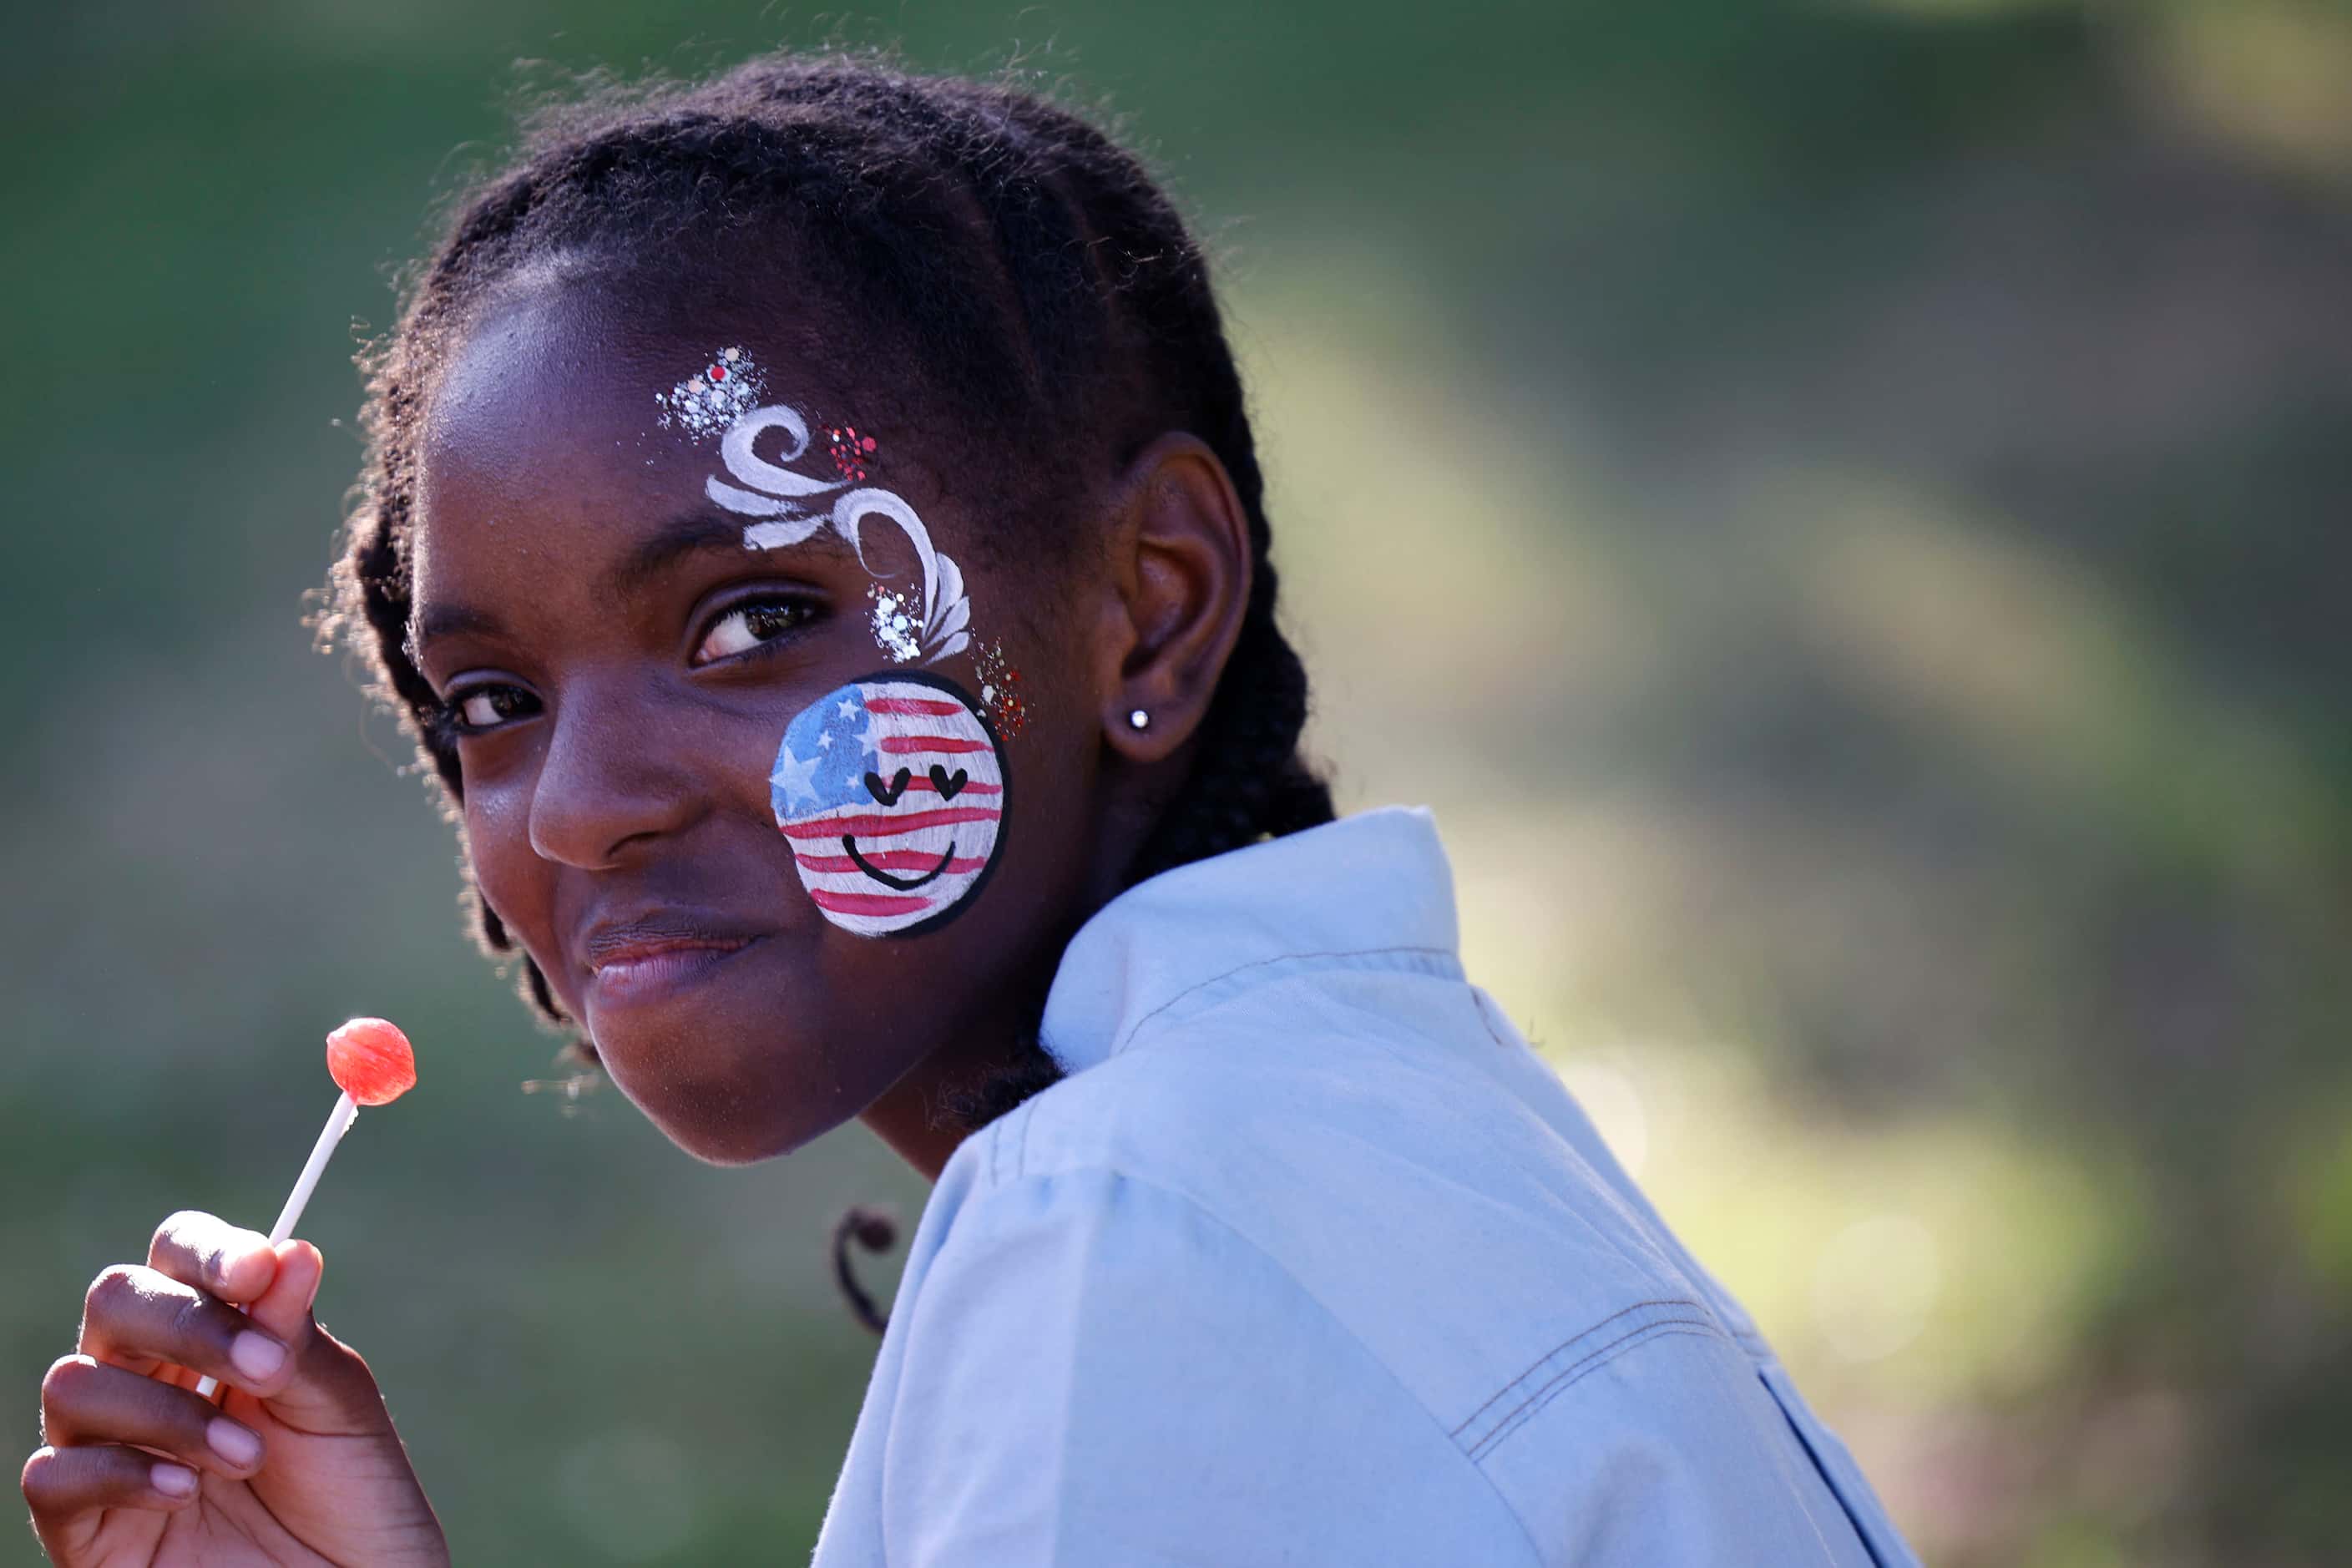 Angel Young, 11, of Dallas with a face painting is seen during the Fair Park Fourth...